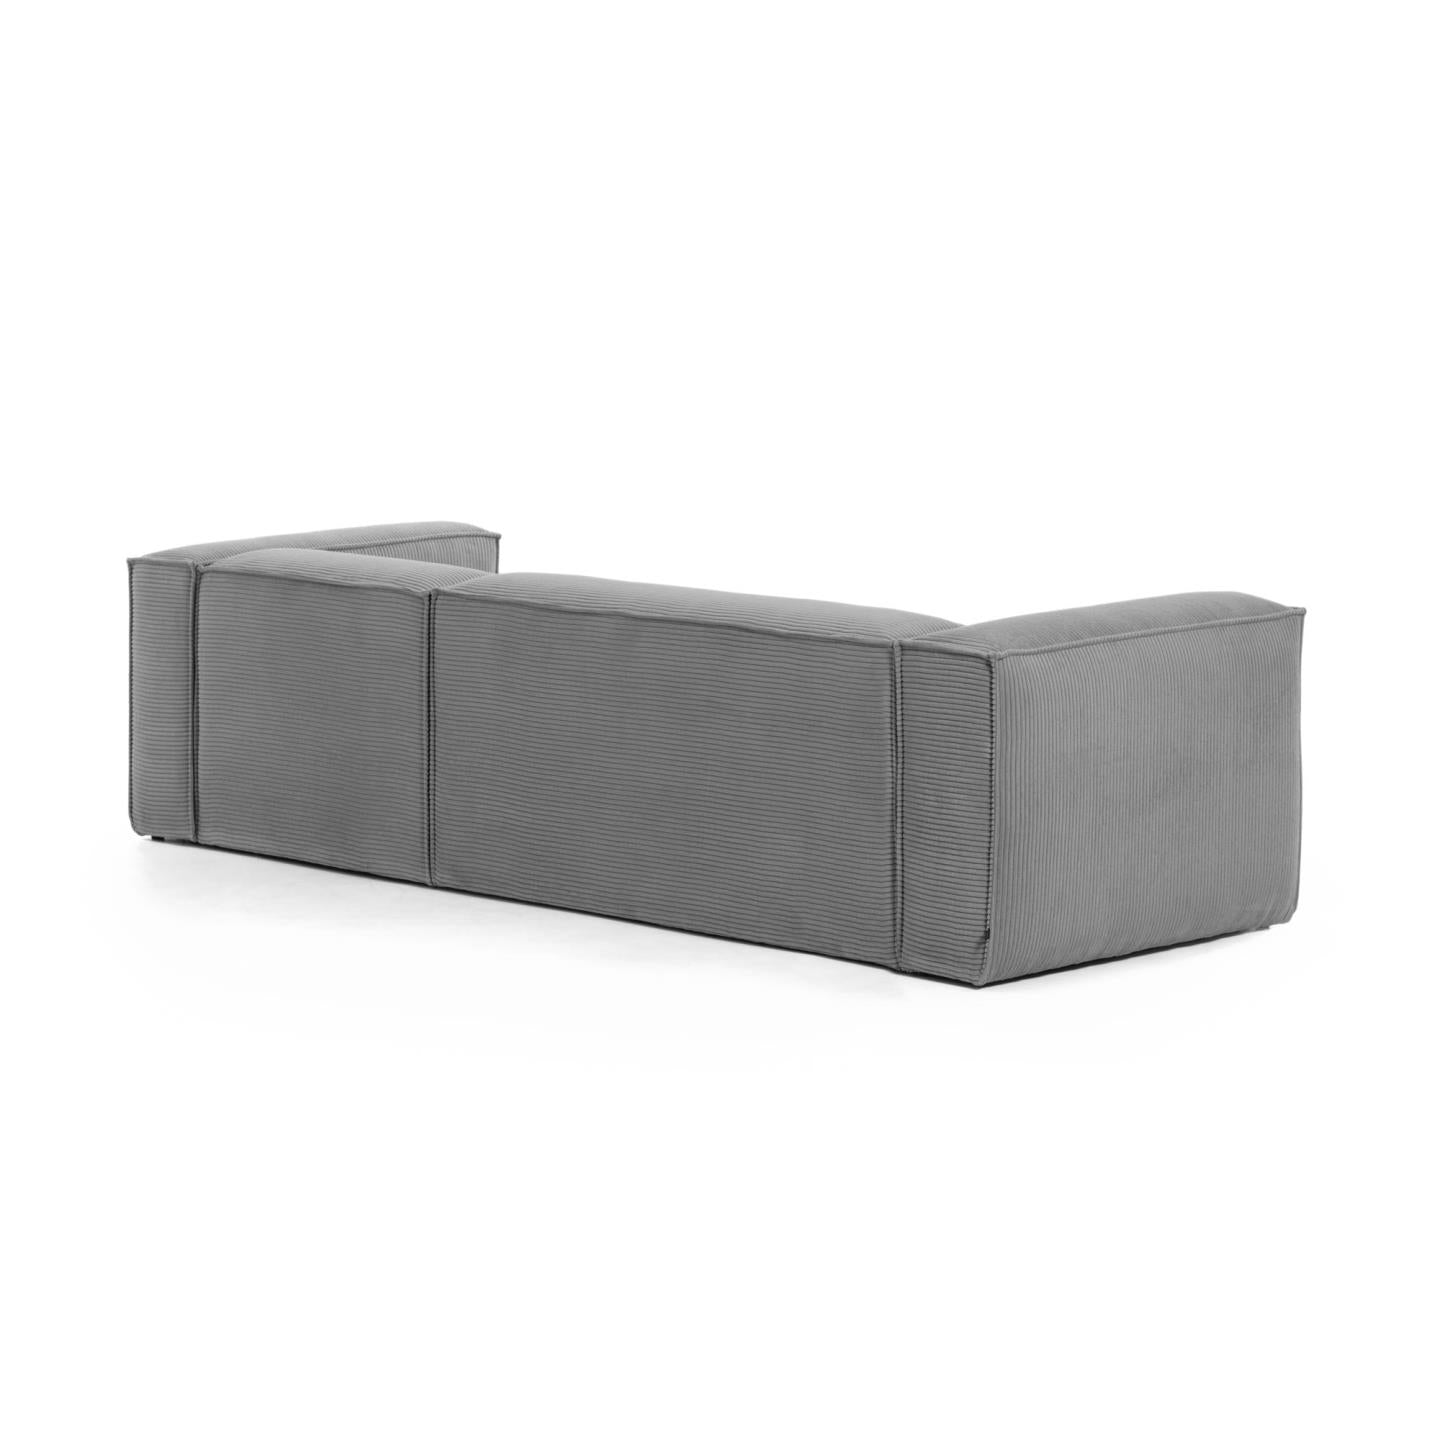 Blok 3 seater sofa with right side chaise longue in grey wide seam corduroy, 300 cm